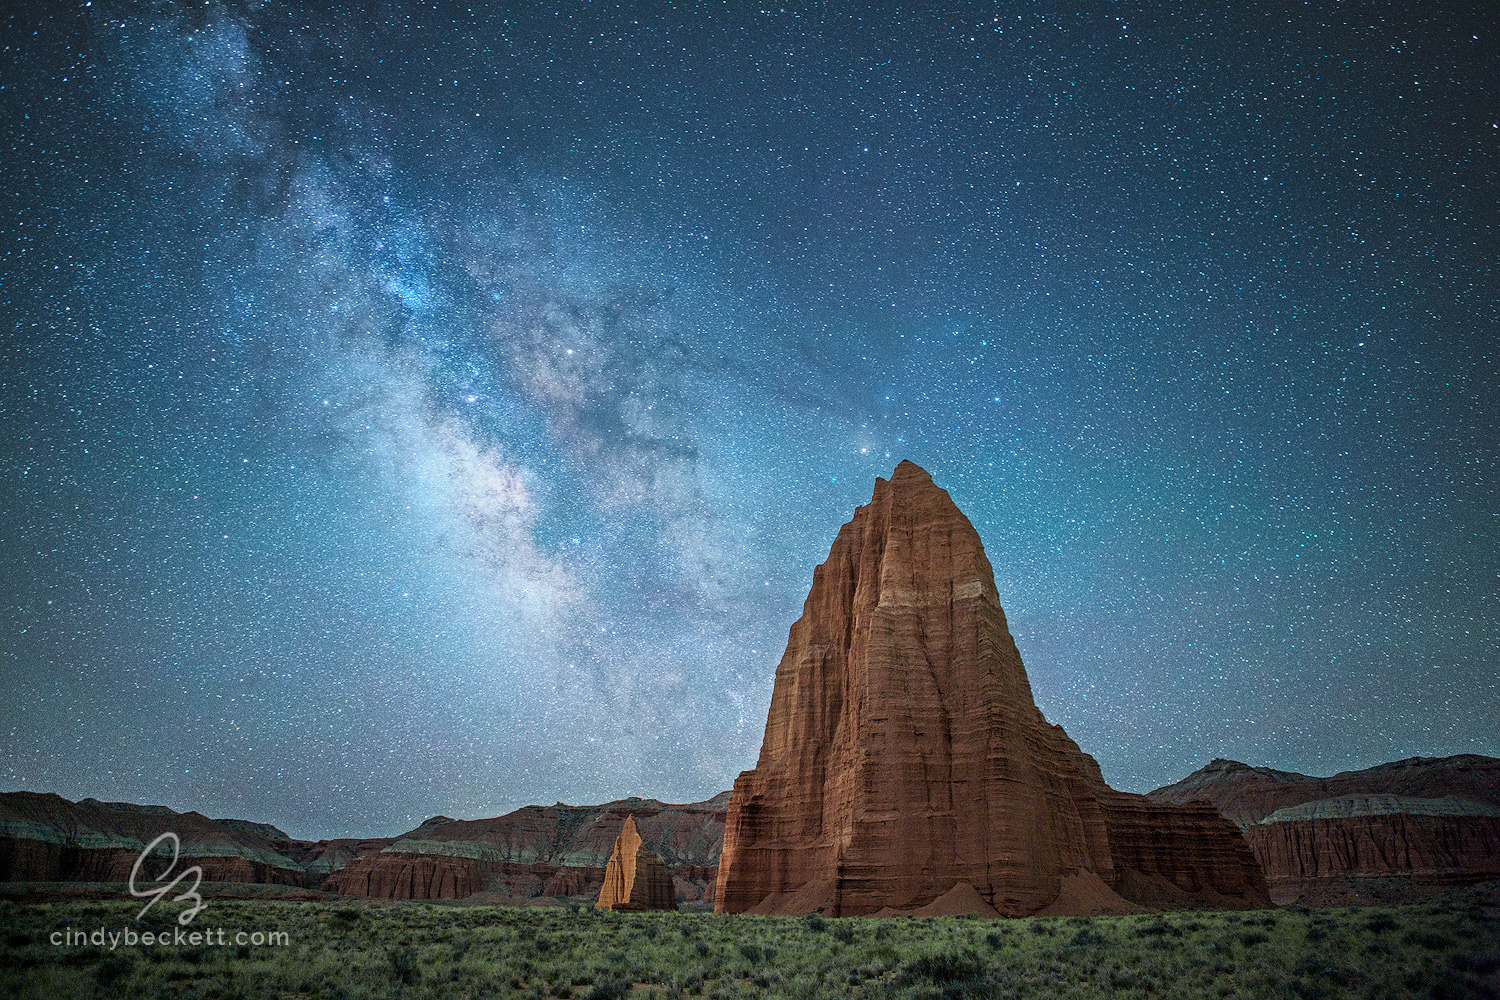 The Milky Way rises above the iconic monoliths, Temple of the Sun and Temple of the Moon, in Capitol Reef National Park, Utah.